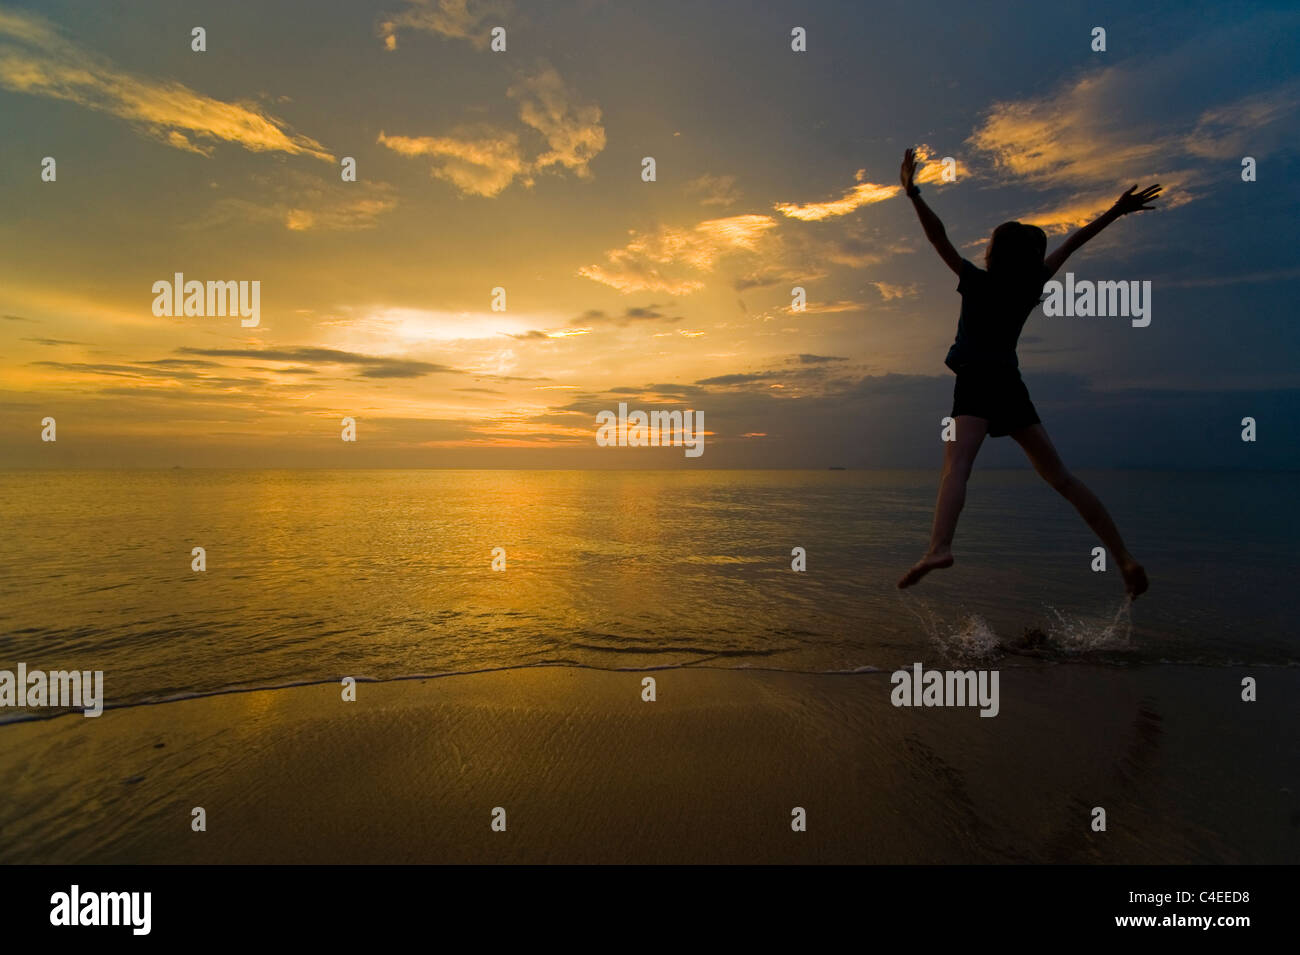 A young jumping for joy and enjoying her freedom on the beach at sunset. Taken on Phra Ae Beach, Koh Lanta, Thailand Stock Photo